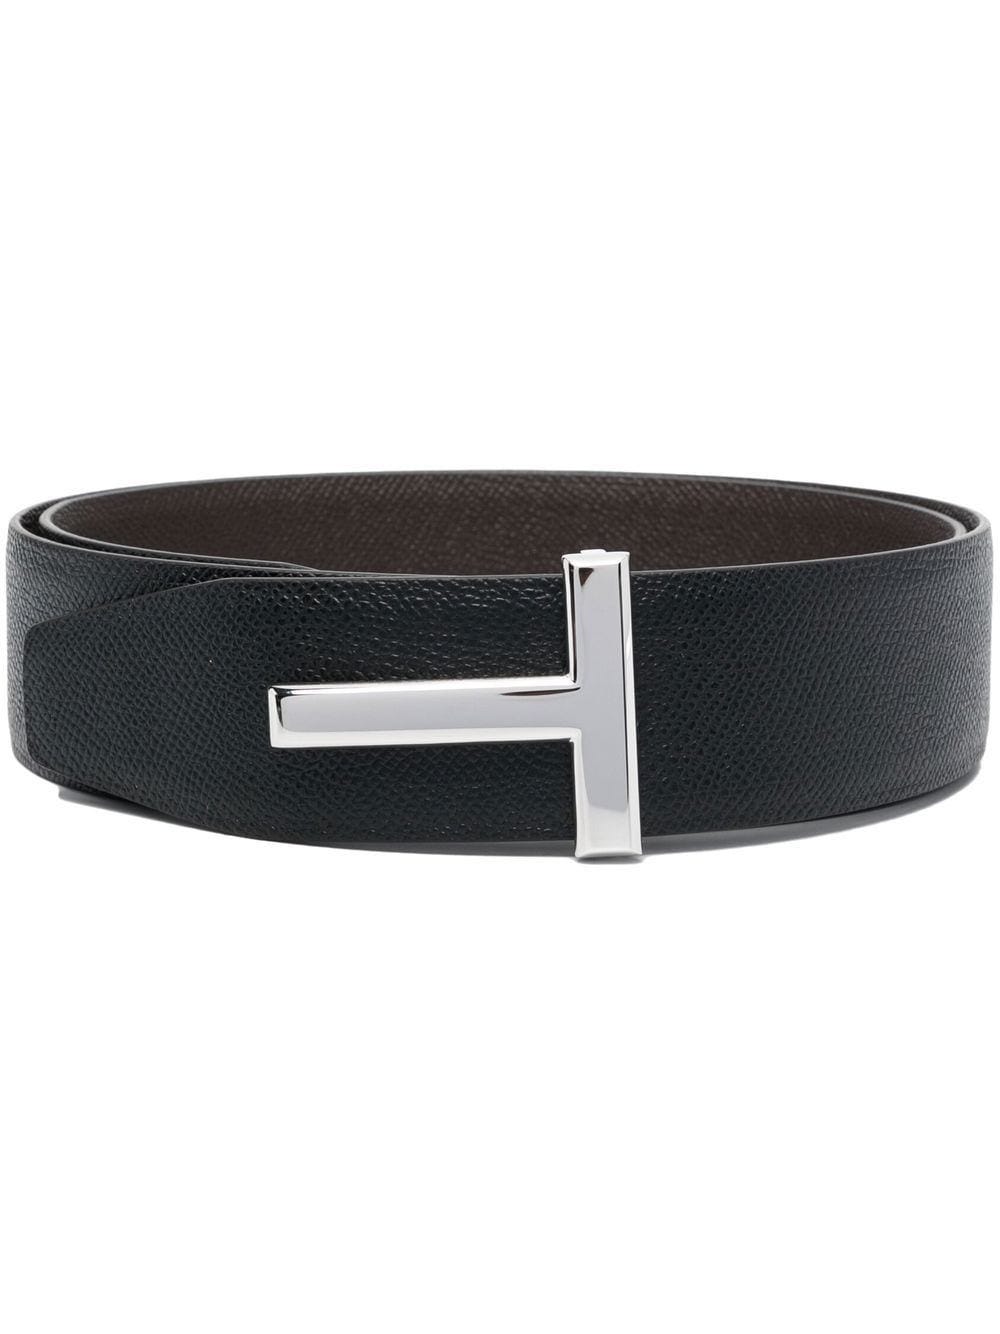 TOM FORD REVERSIBLE T-BUCKLE LEATHER BELT